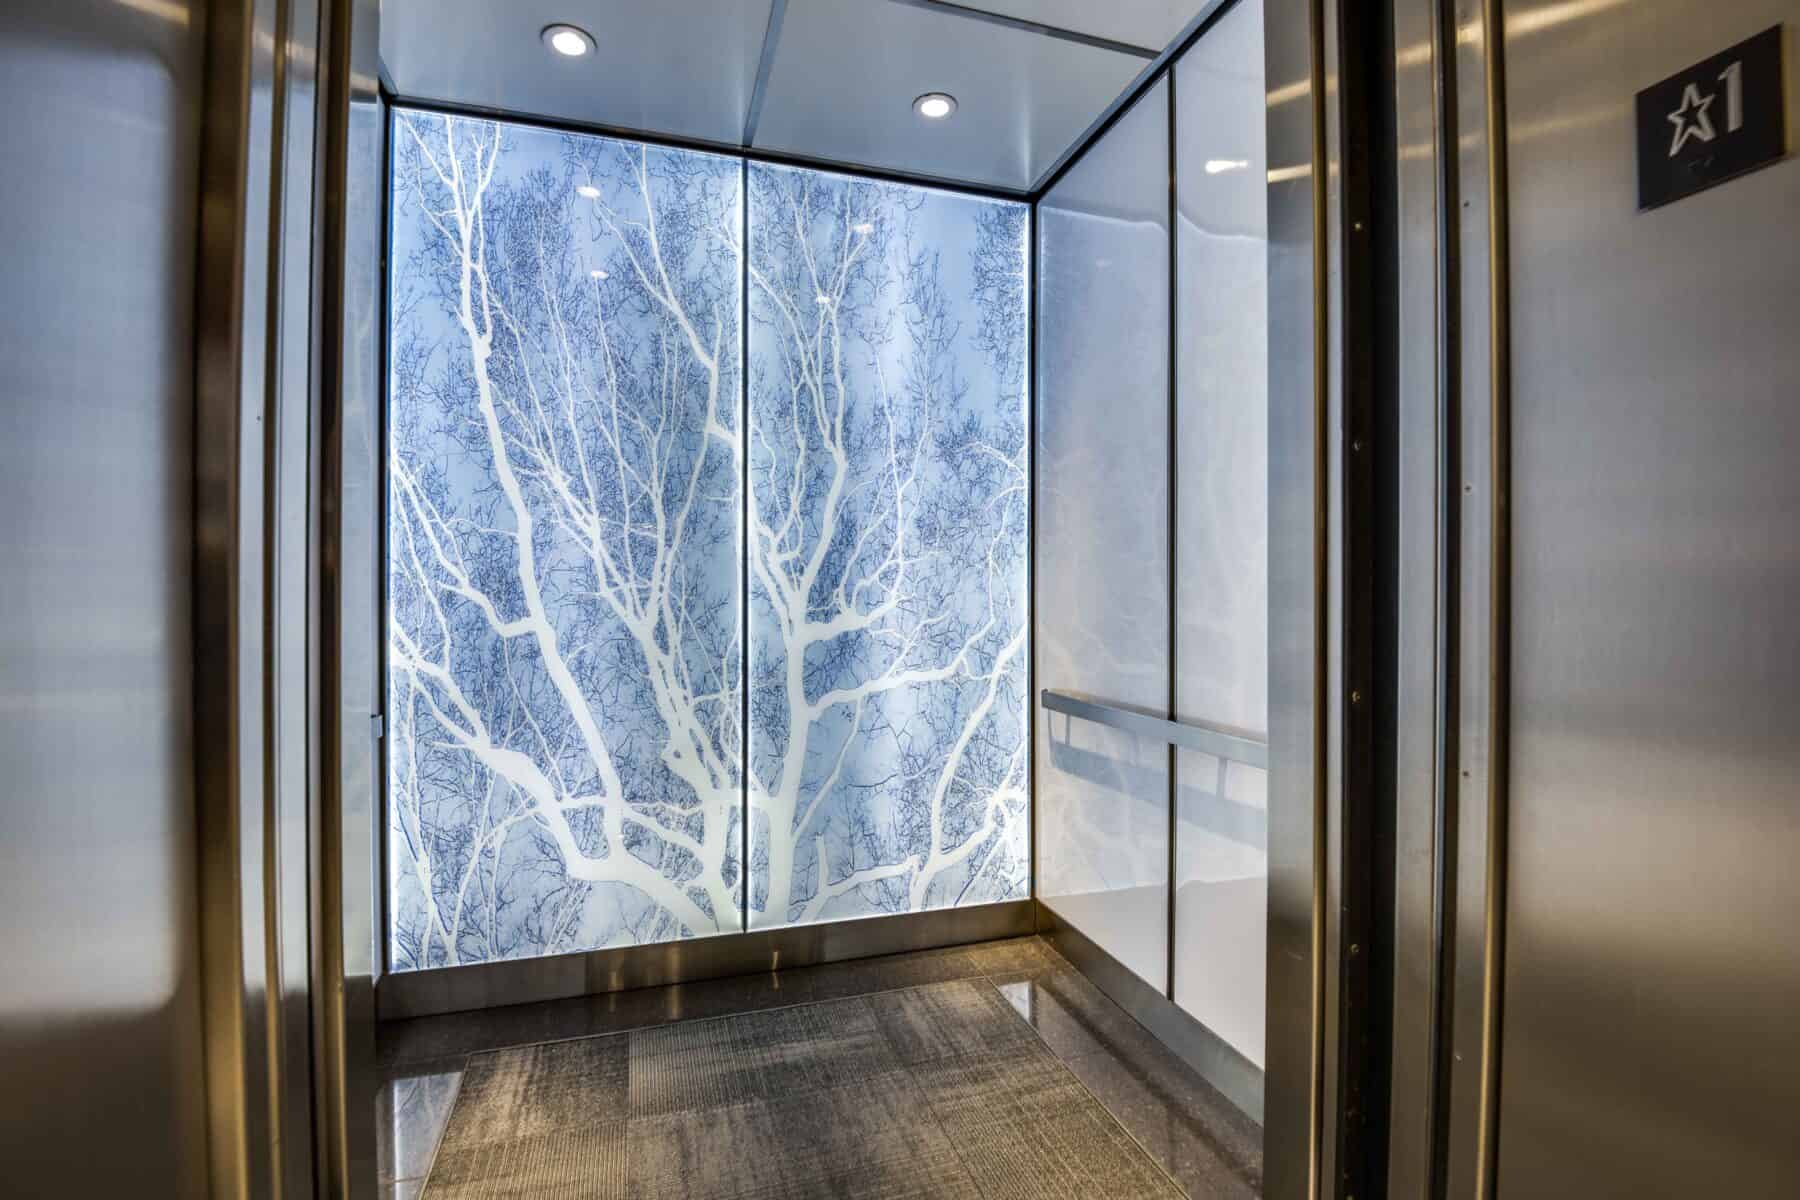 Custom Fabrication of Architectural Backlit Custom Image Glass Panels for Elevators for Construction Specialty Projects by Commercial Builder & General Contractor Structural Enterprises